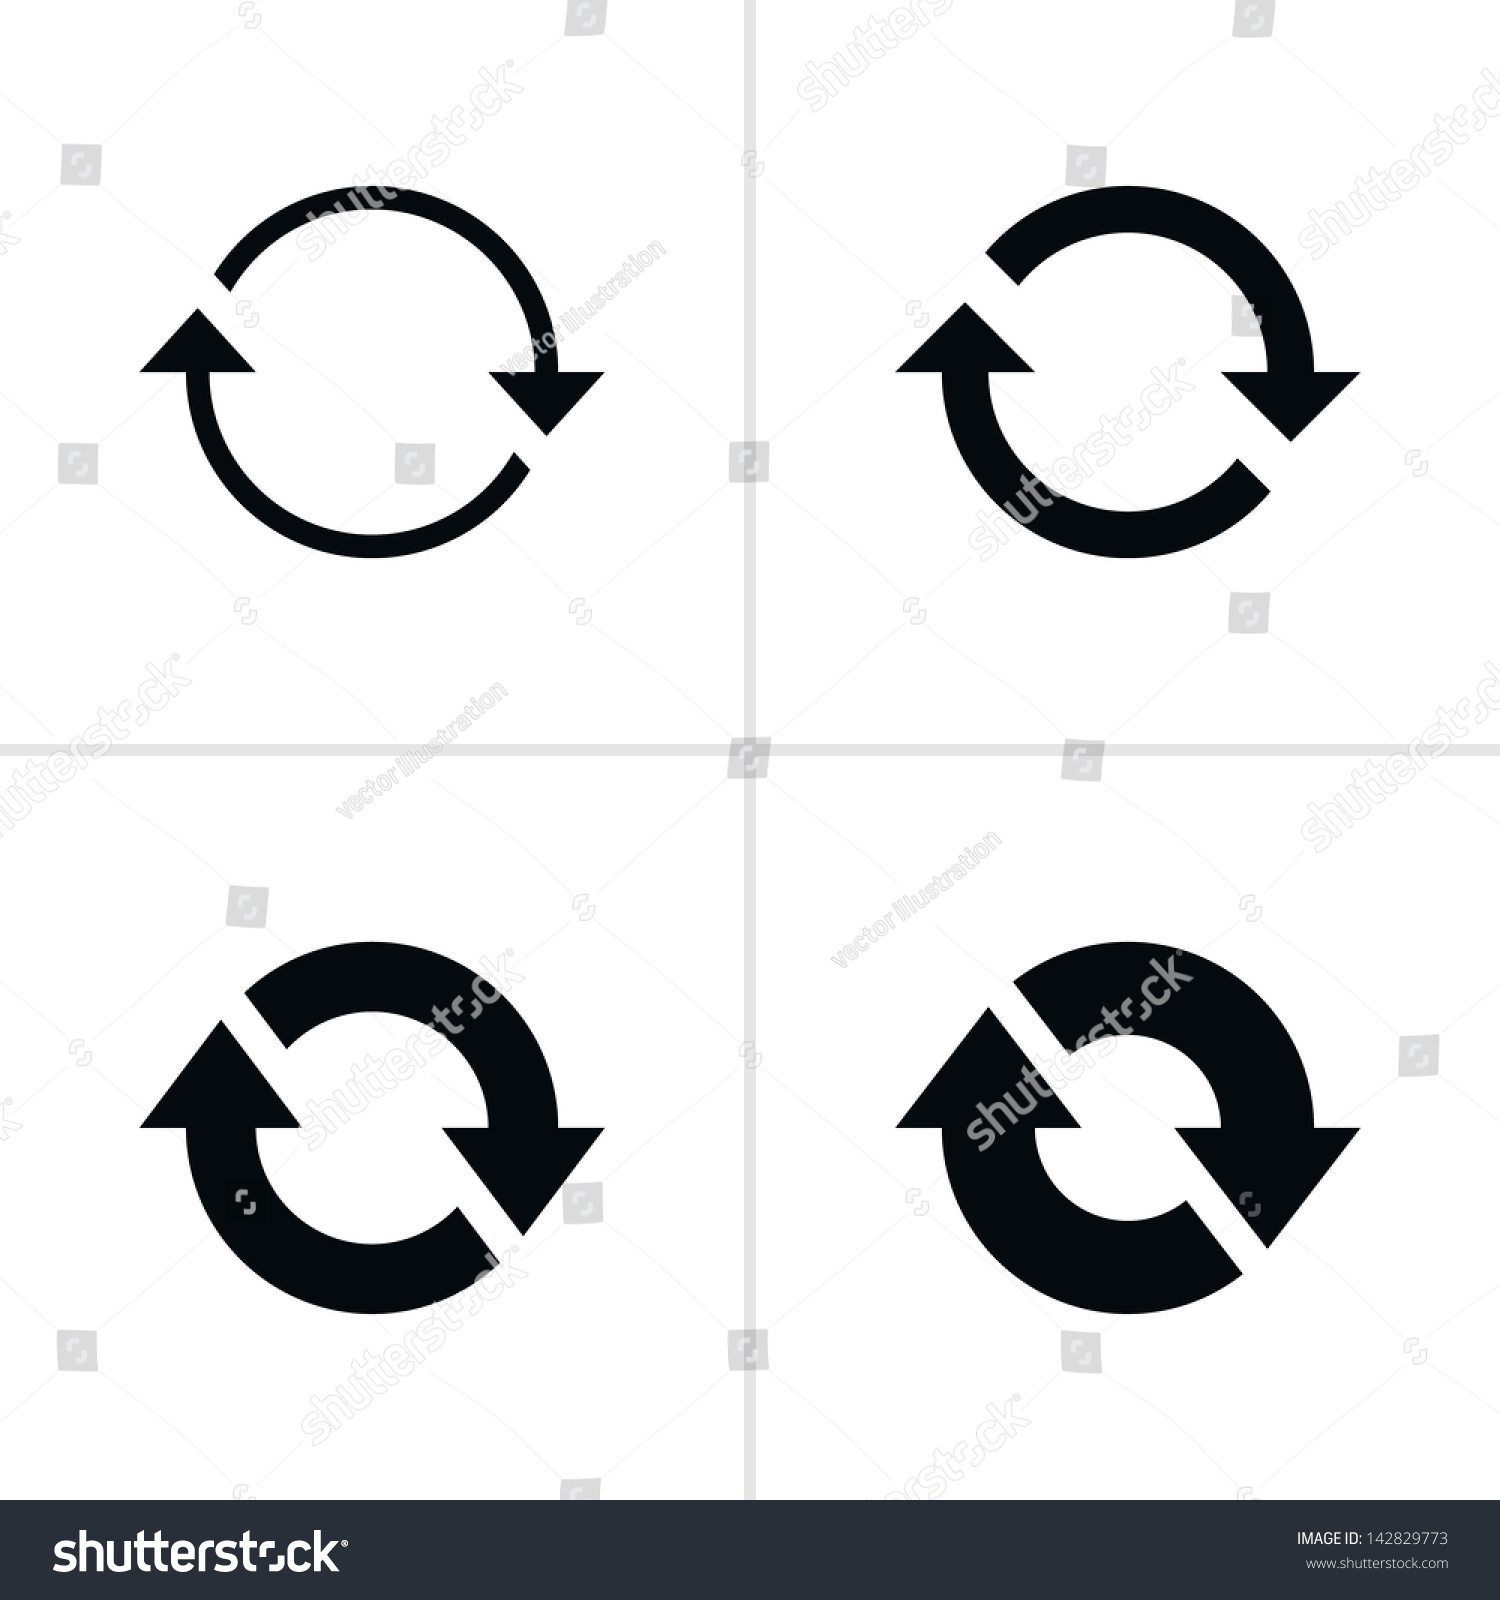 4 arrow sign reload refresh rotation loop pictogram. Set 02. Simple black icon on white background. Modern mono solid plain flat minimal style. Vector illustration web design elements save in 8 eps #142829773